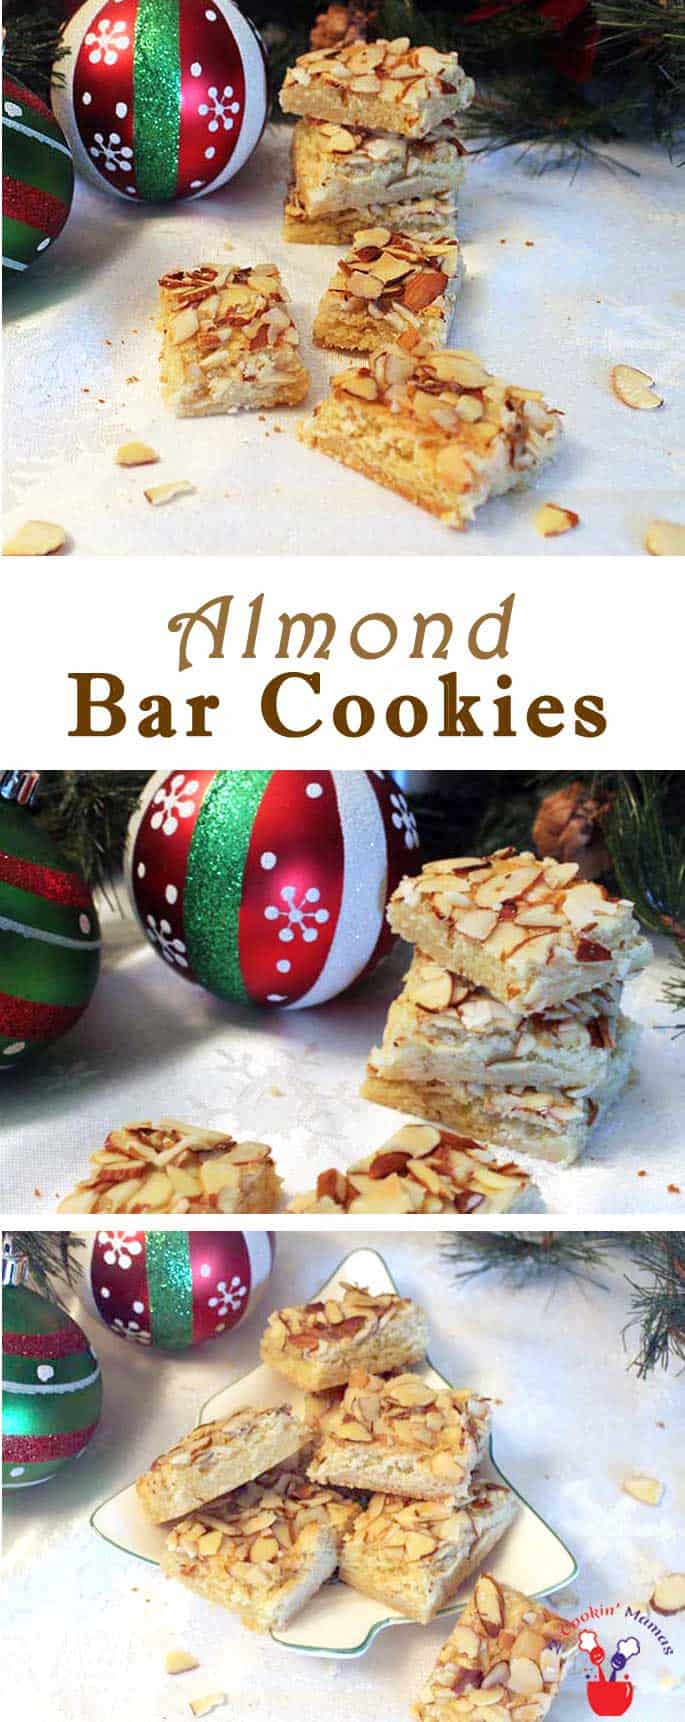 Almond Bar Cookies - Day 9